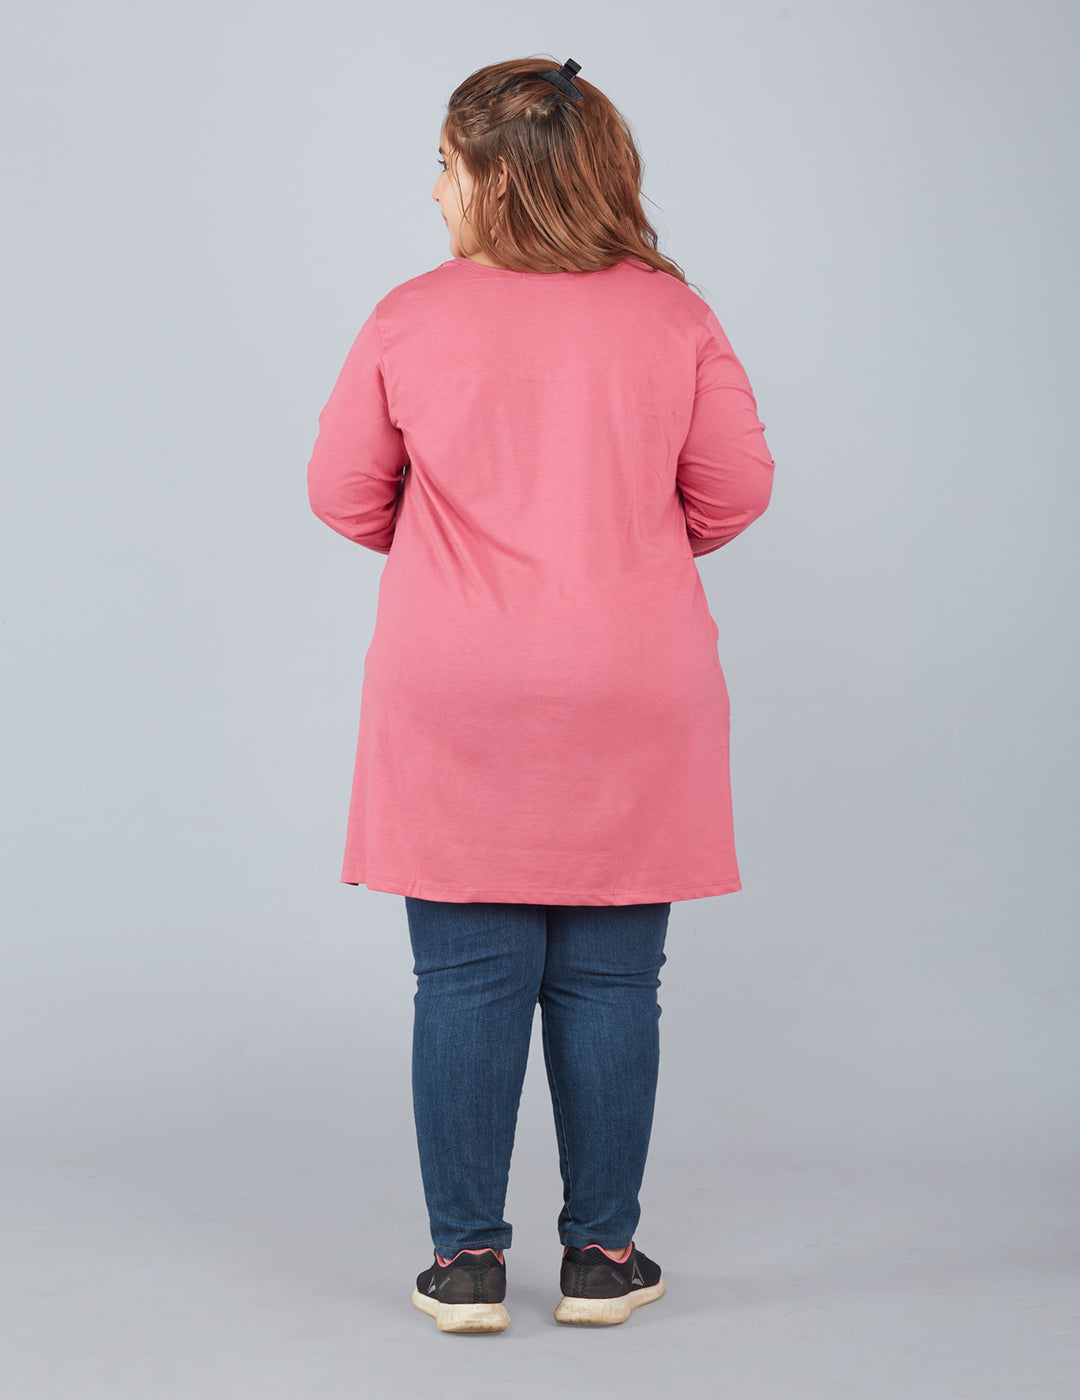 Cotton Plus Size Long Tops For Women In Full Sleeves- Rosy Pink At Online